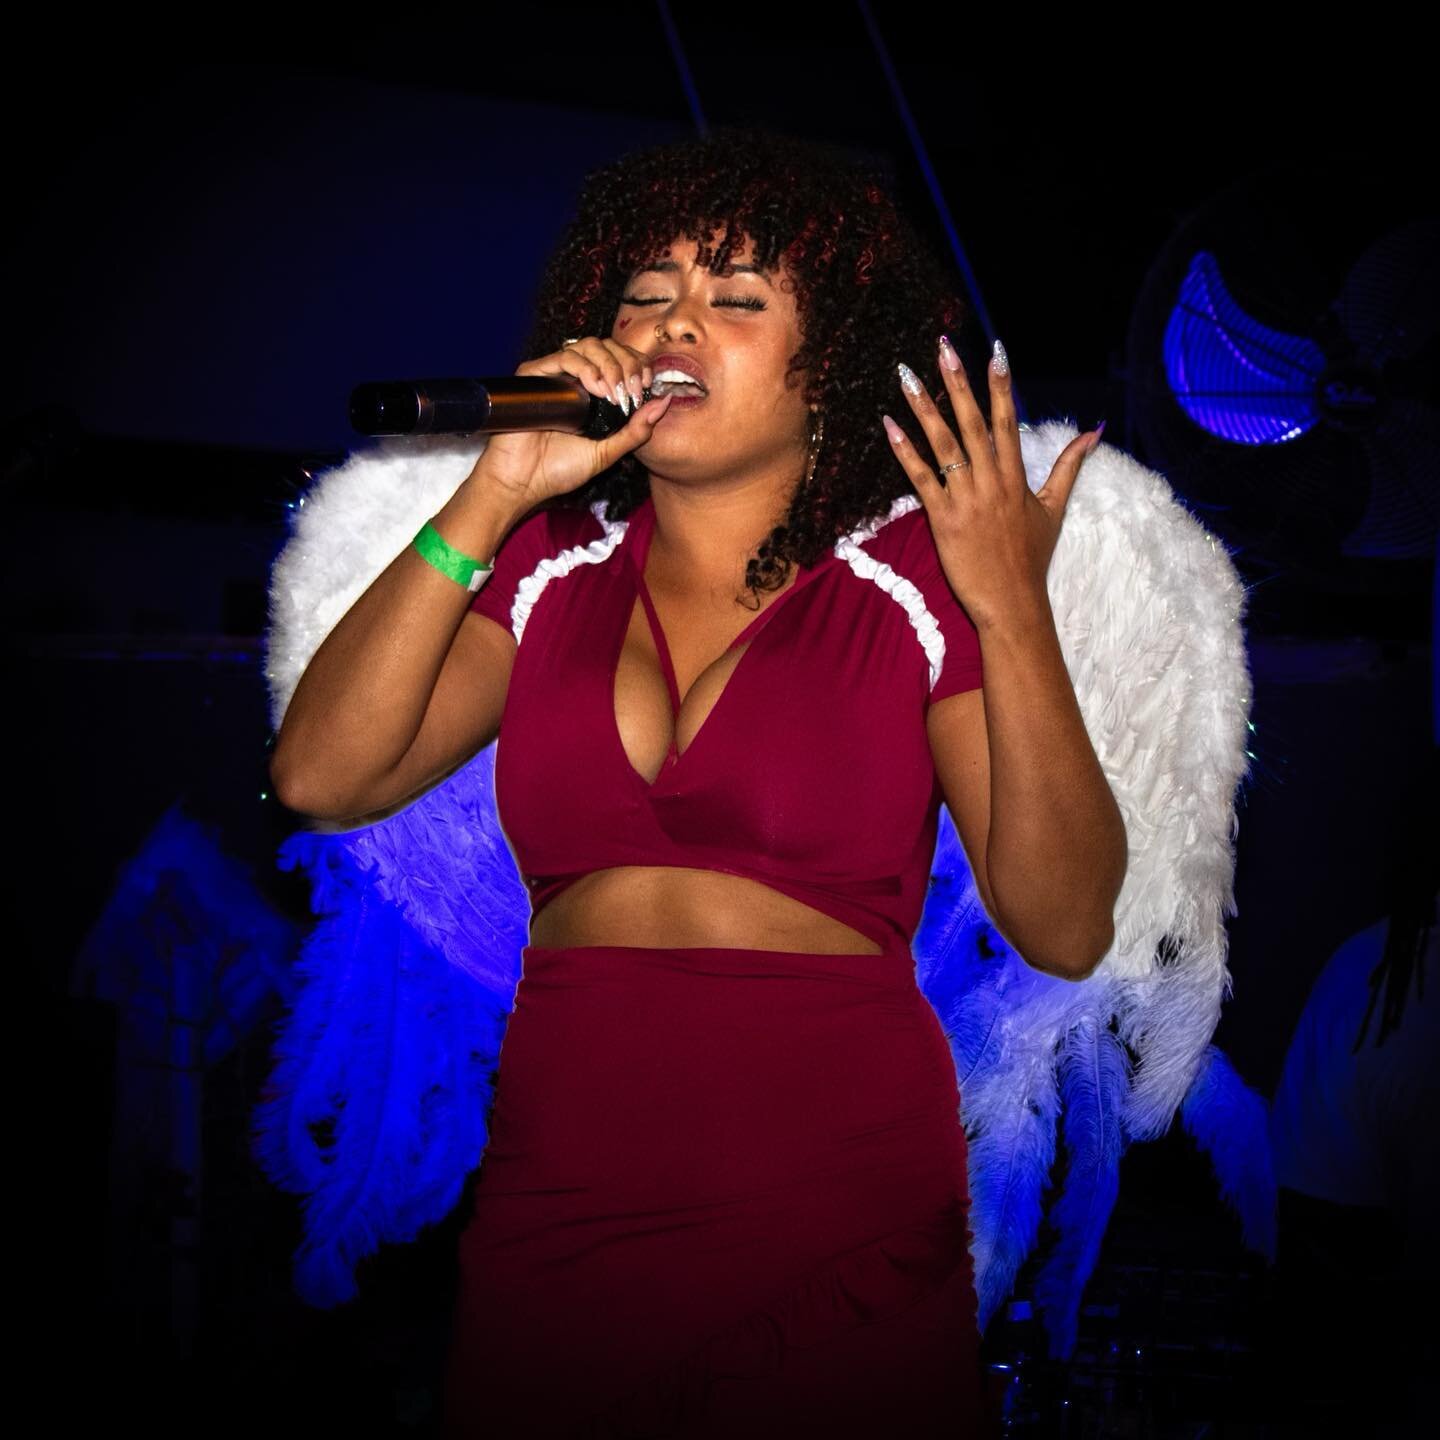 Meet Sanai!!! With the voice of an ANGEL 🕊Our last artist showcase was truly spooktackular and Sanai delivered a flawless costume 🔥

📸: @picsbygemz 

#houseofamor